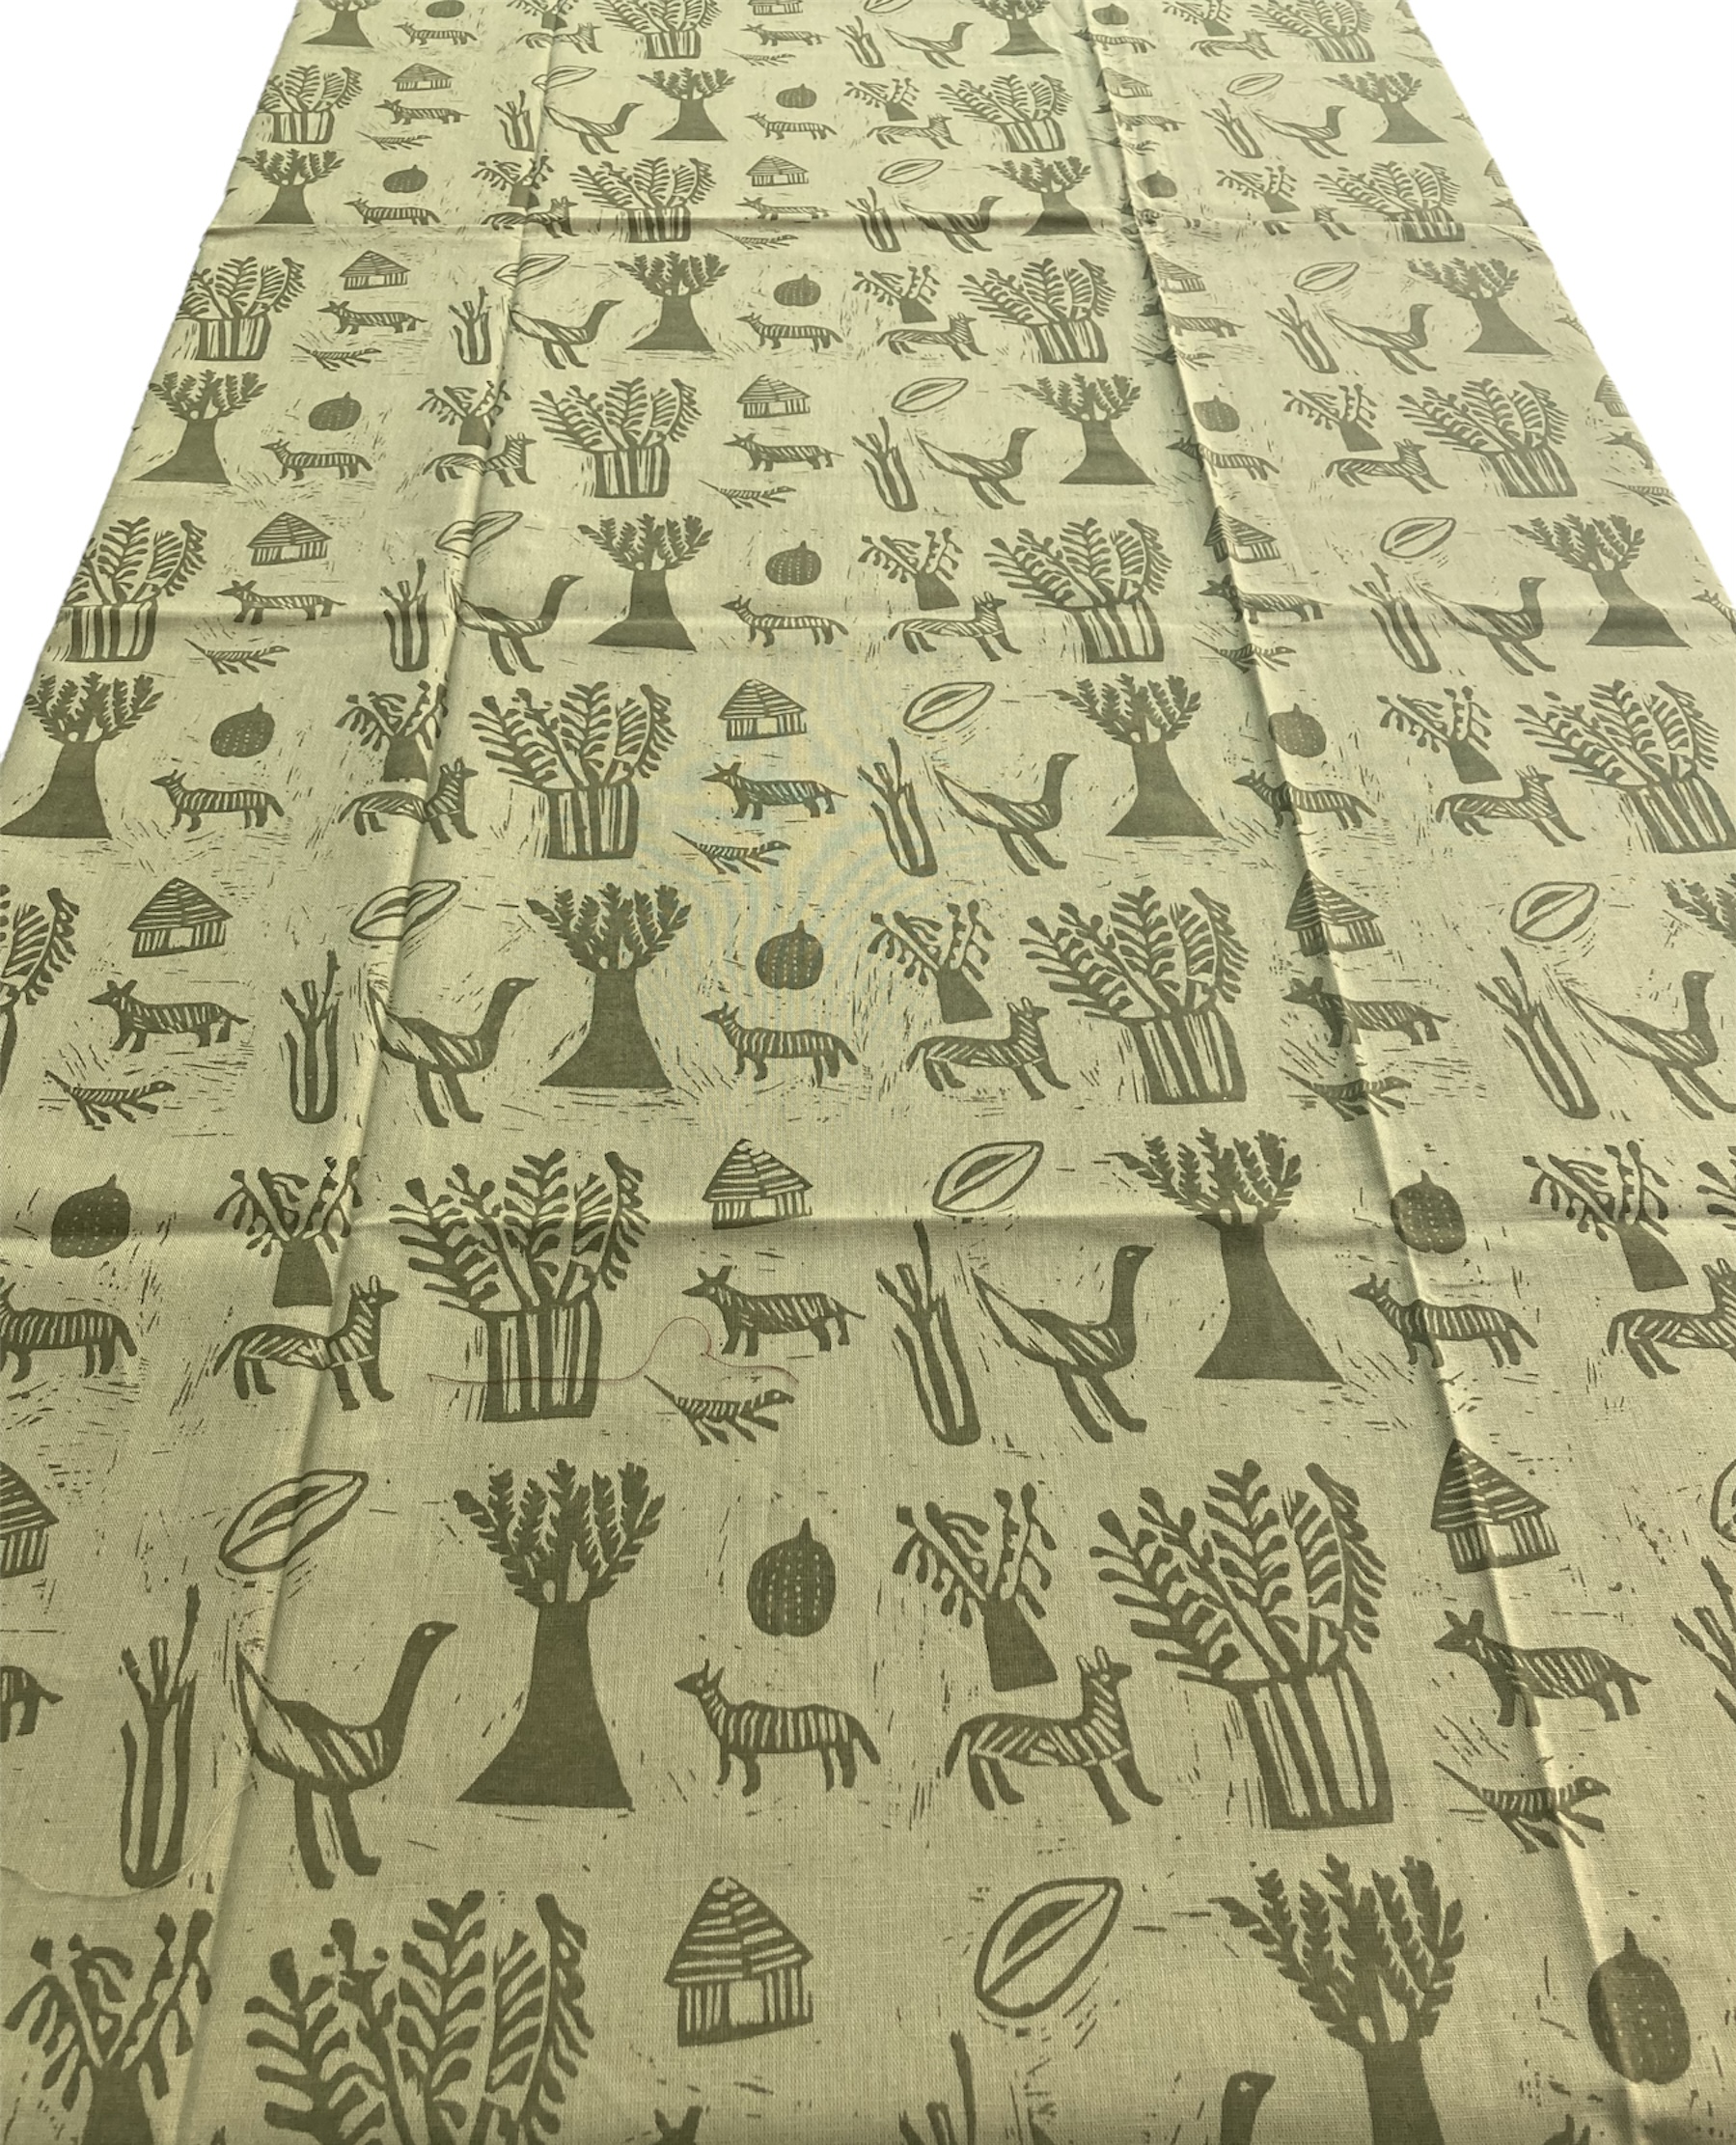 100% cotton Tablecloth approx. 79" x 57" from Namibia - # g10t